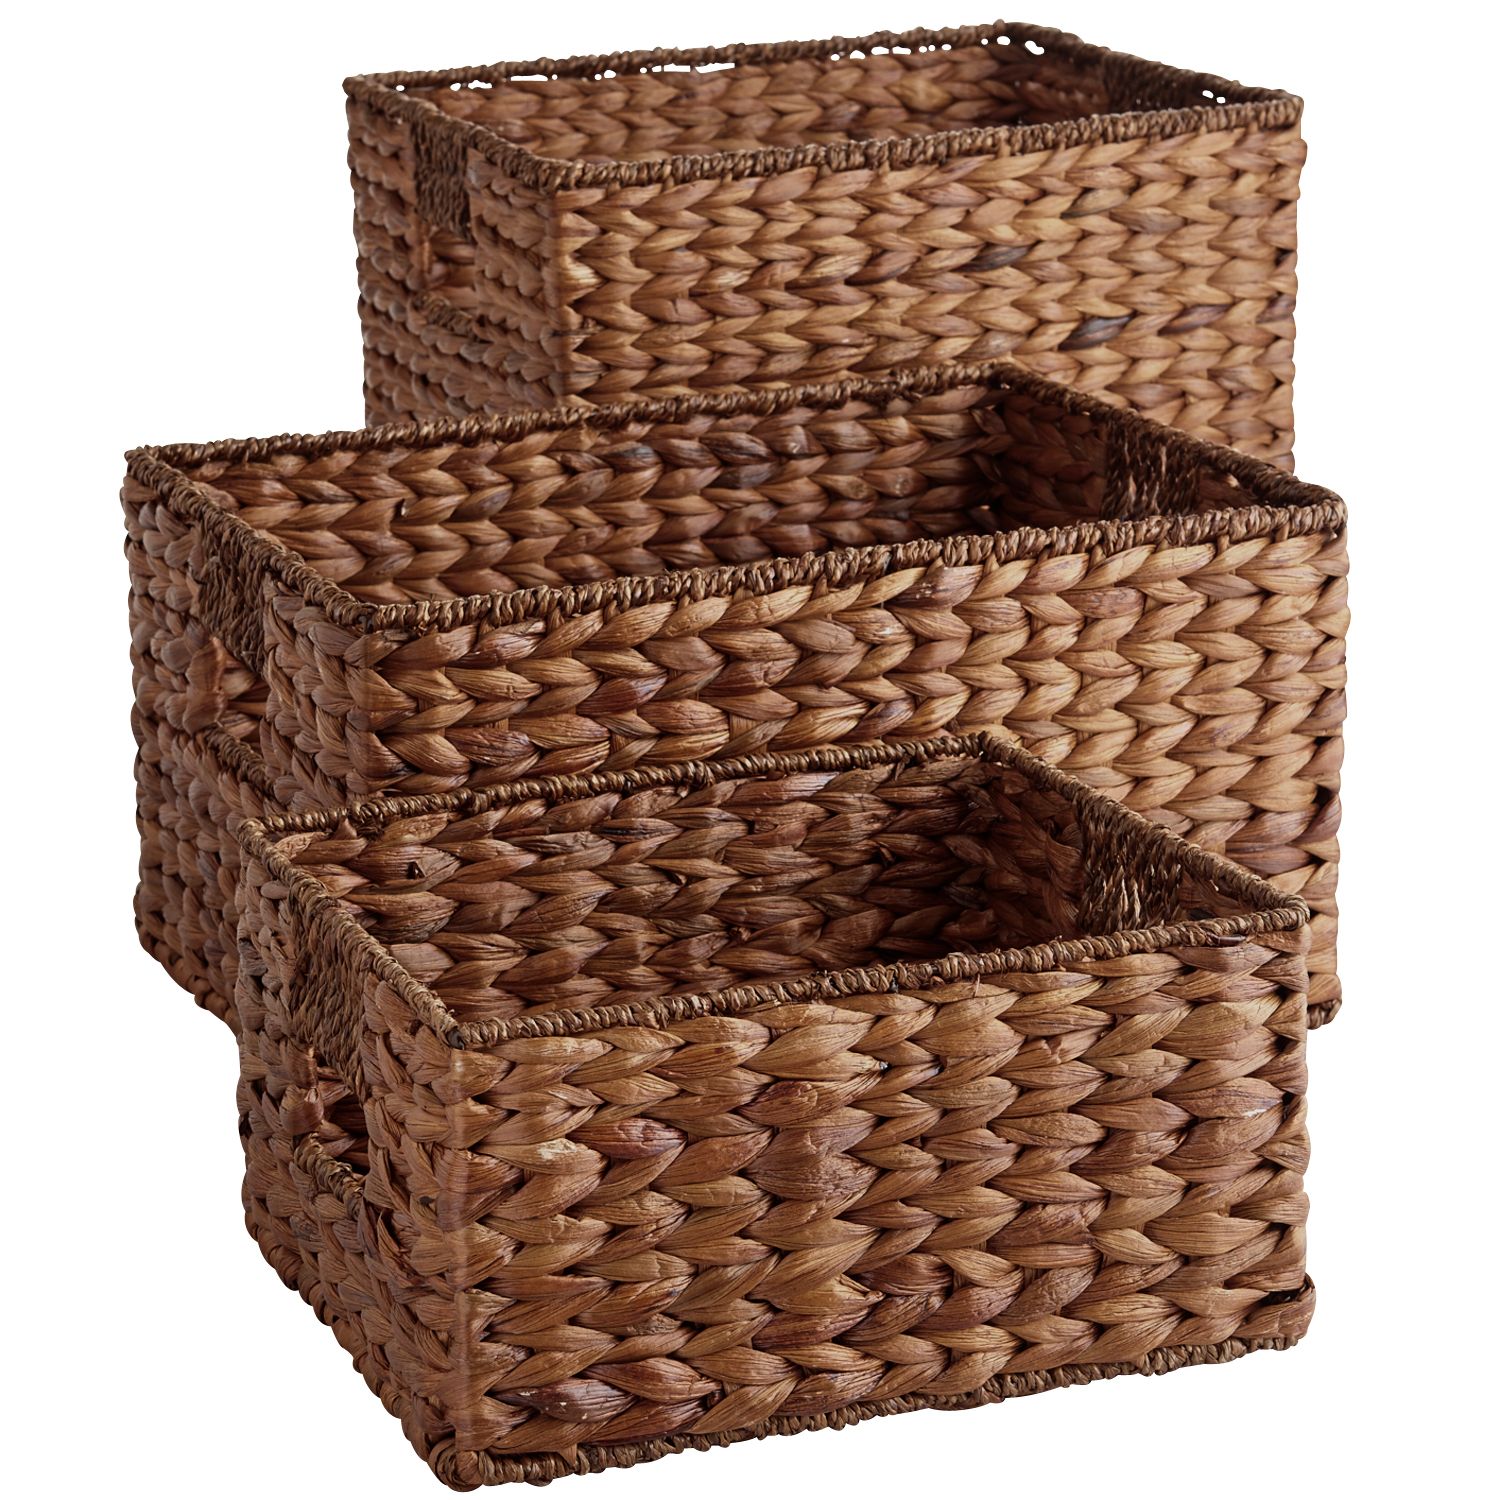 Save this item to Pinterest. Open Gallery (5 Images). Carson Espresso Wicker  Shelf Storage Baskets